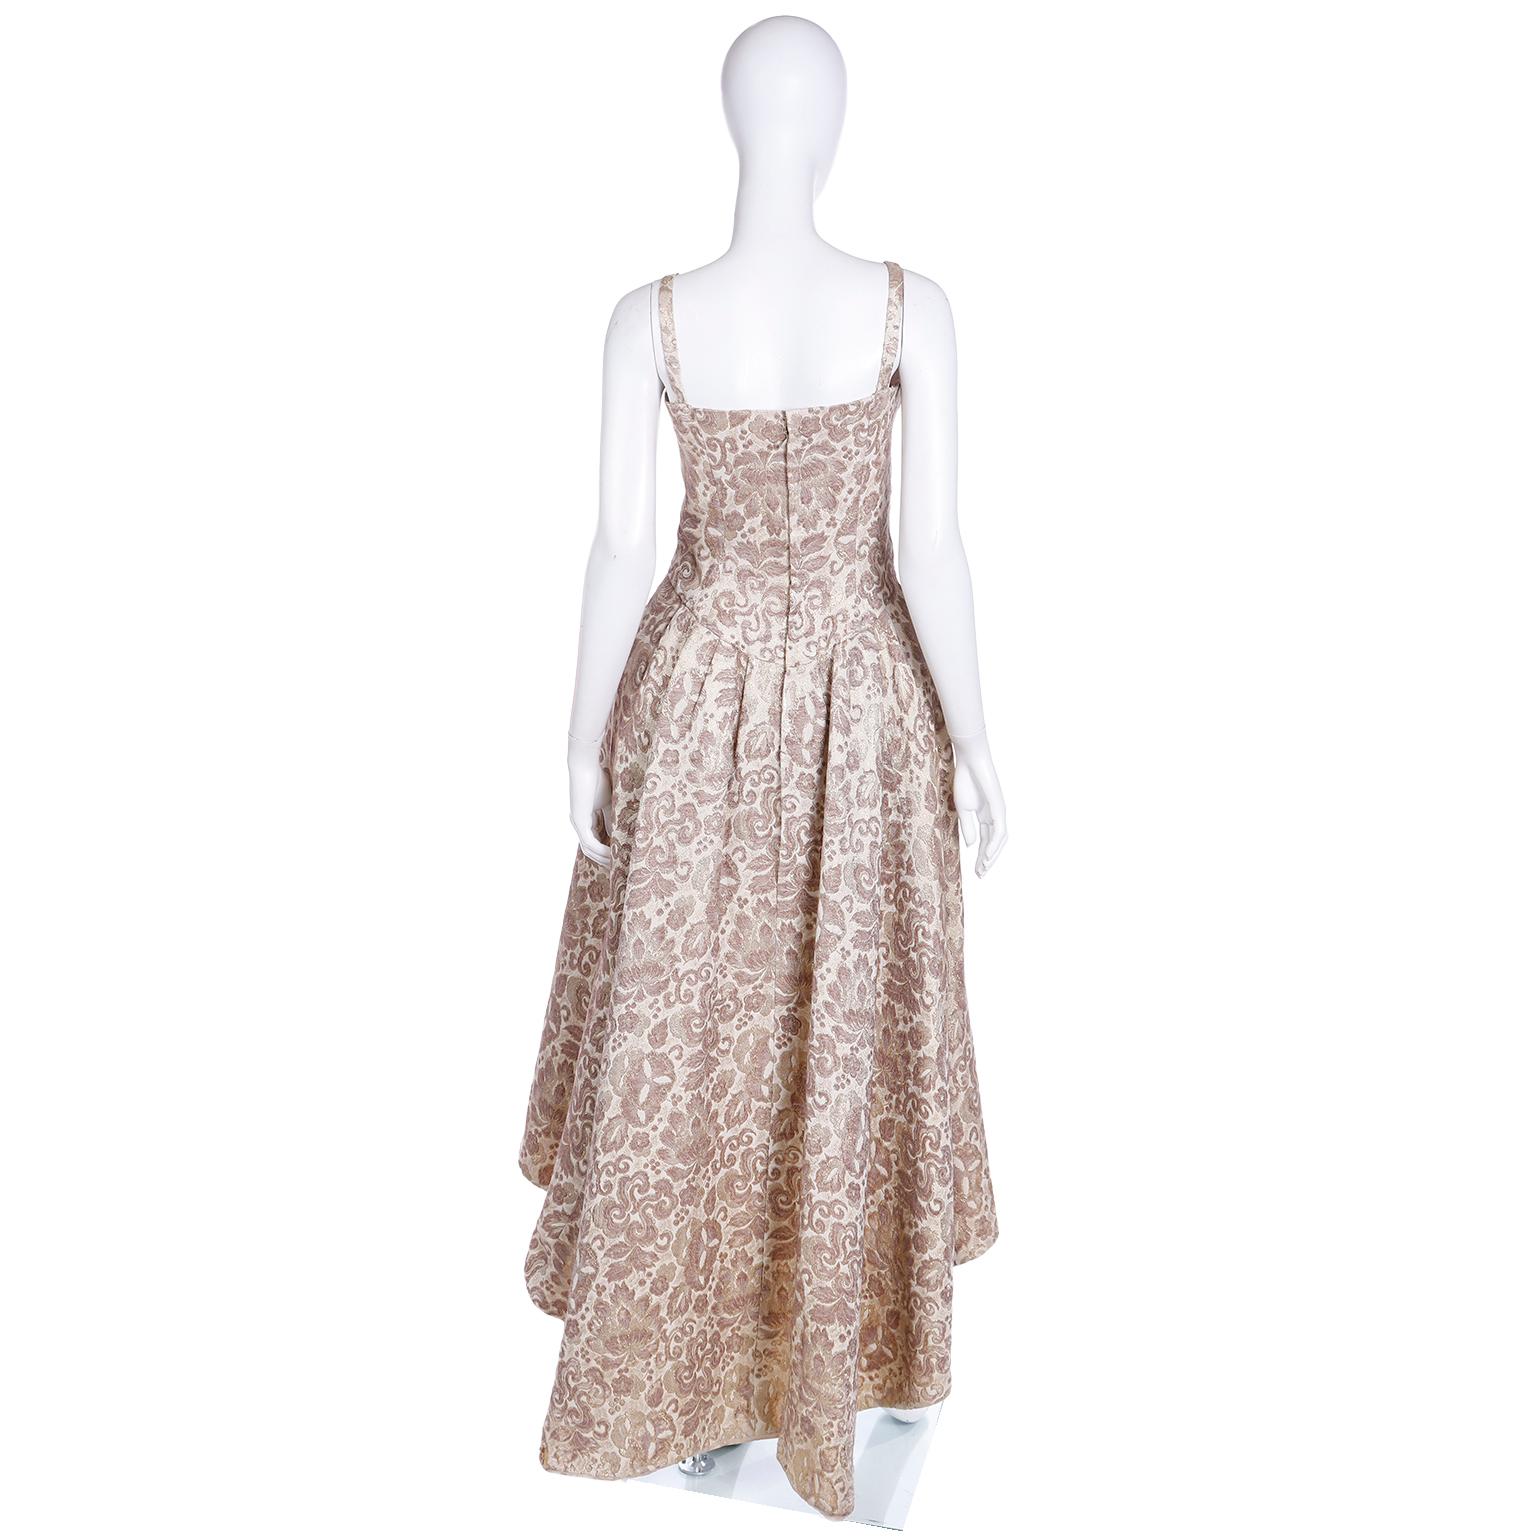 Women's 1950s Bronze Gold Metallic Jacquard High Low Evening Dress With Bows For Sale